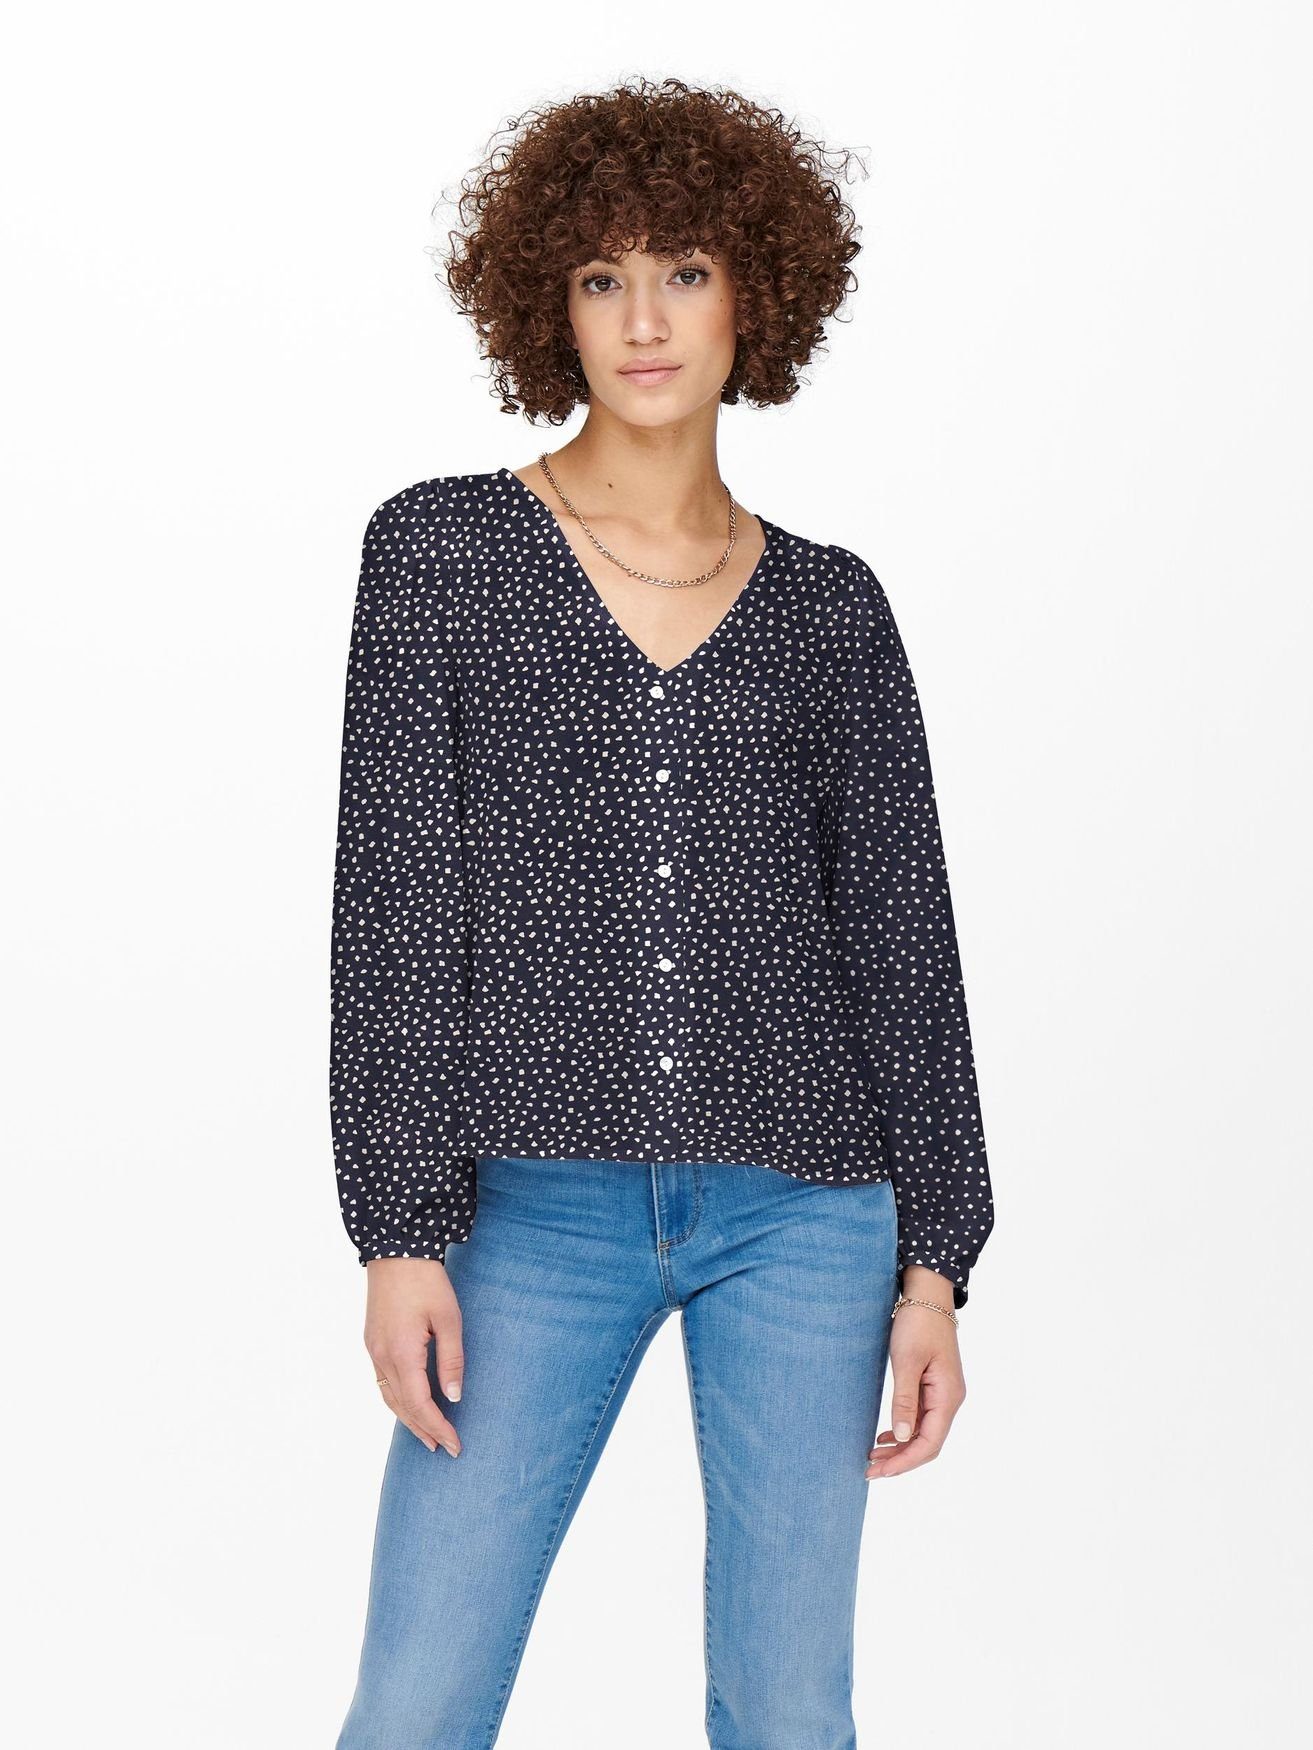 TOP ONLSONJA Blusenshirt L/S PTM LIFE - ONLY 15251513 in Dunkelblau BUTTON NOOS 4677